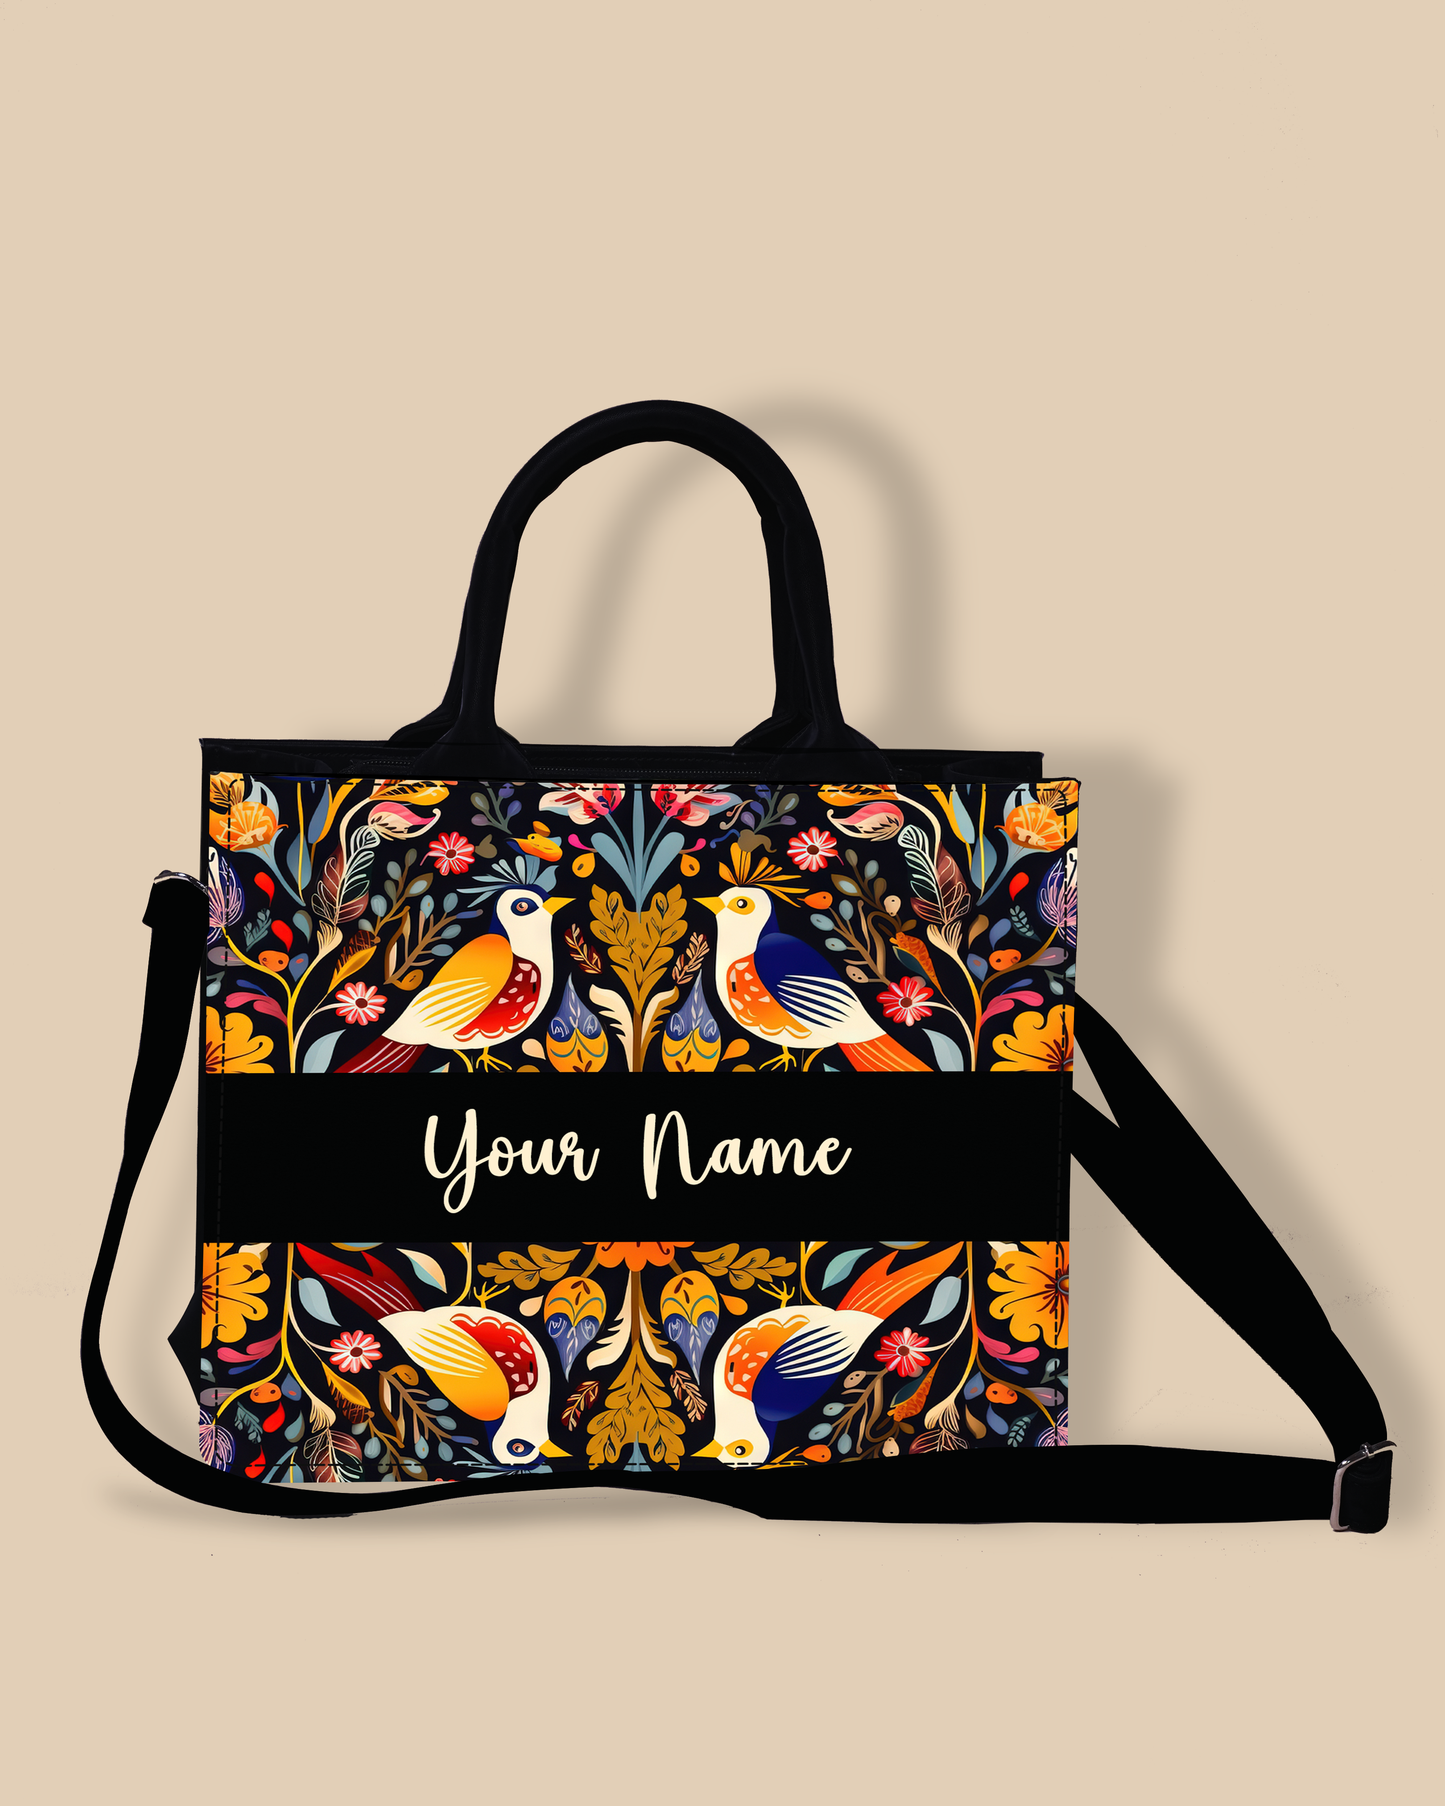 Customized small Tote Bag Designed With Beautiful Birds And Embellished Flowers